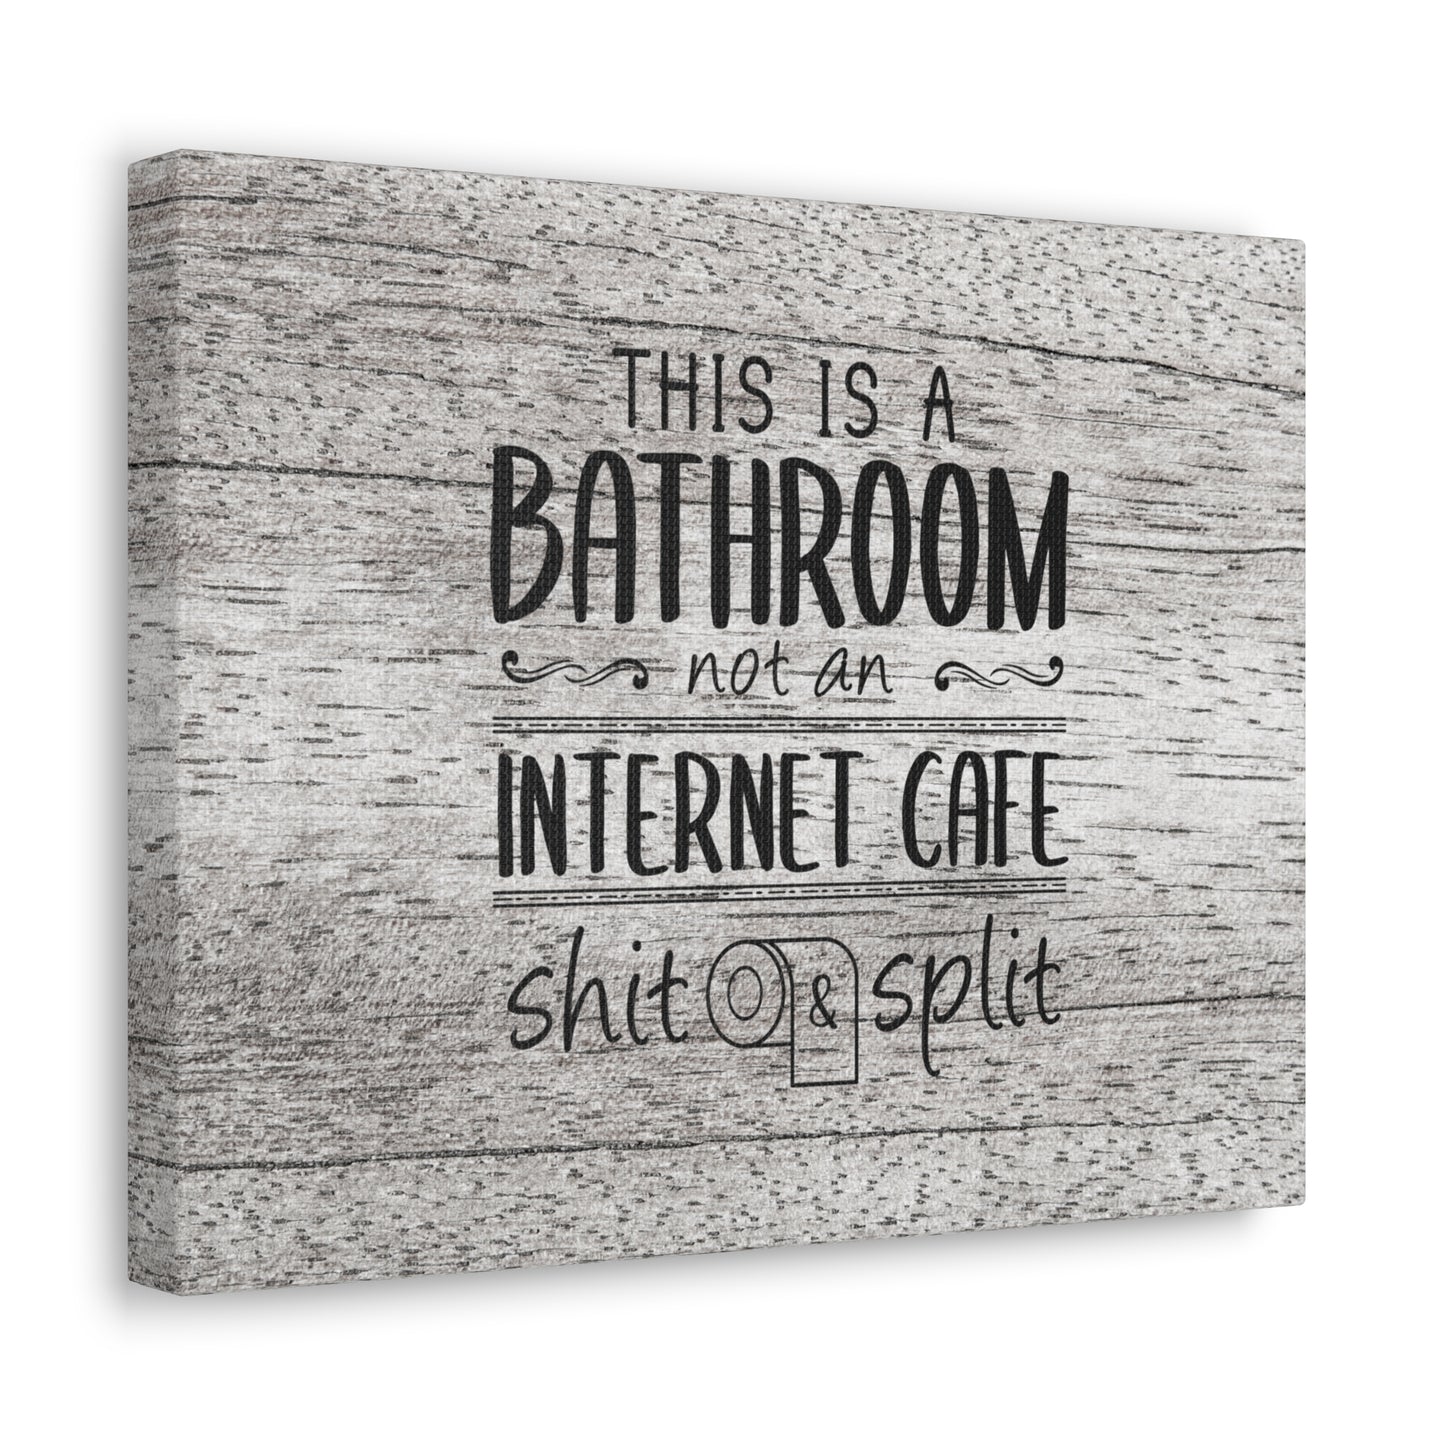 "Sh*t & Split" Wall Art - Weave Got Gifts - Unique Gifts You Won’t Find Anywhere Else!